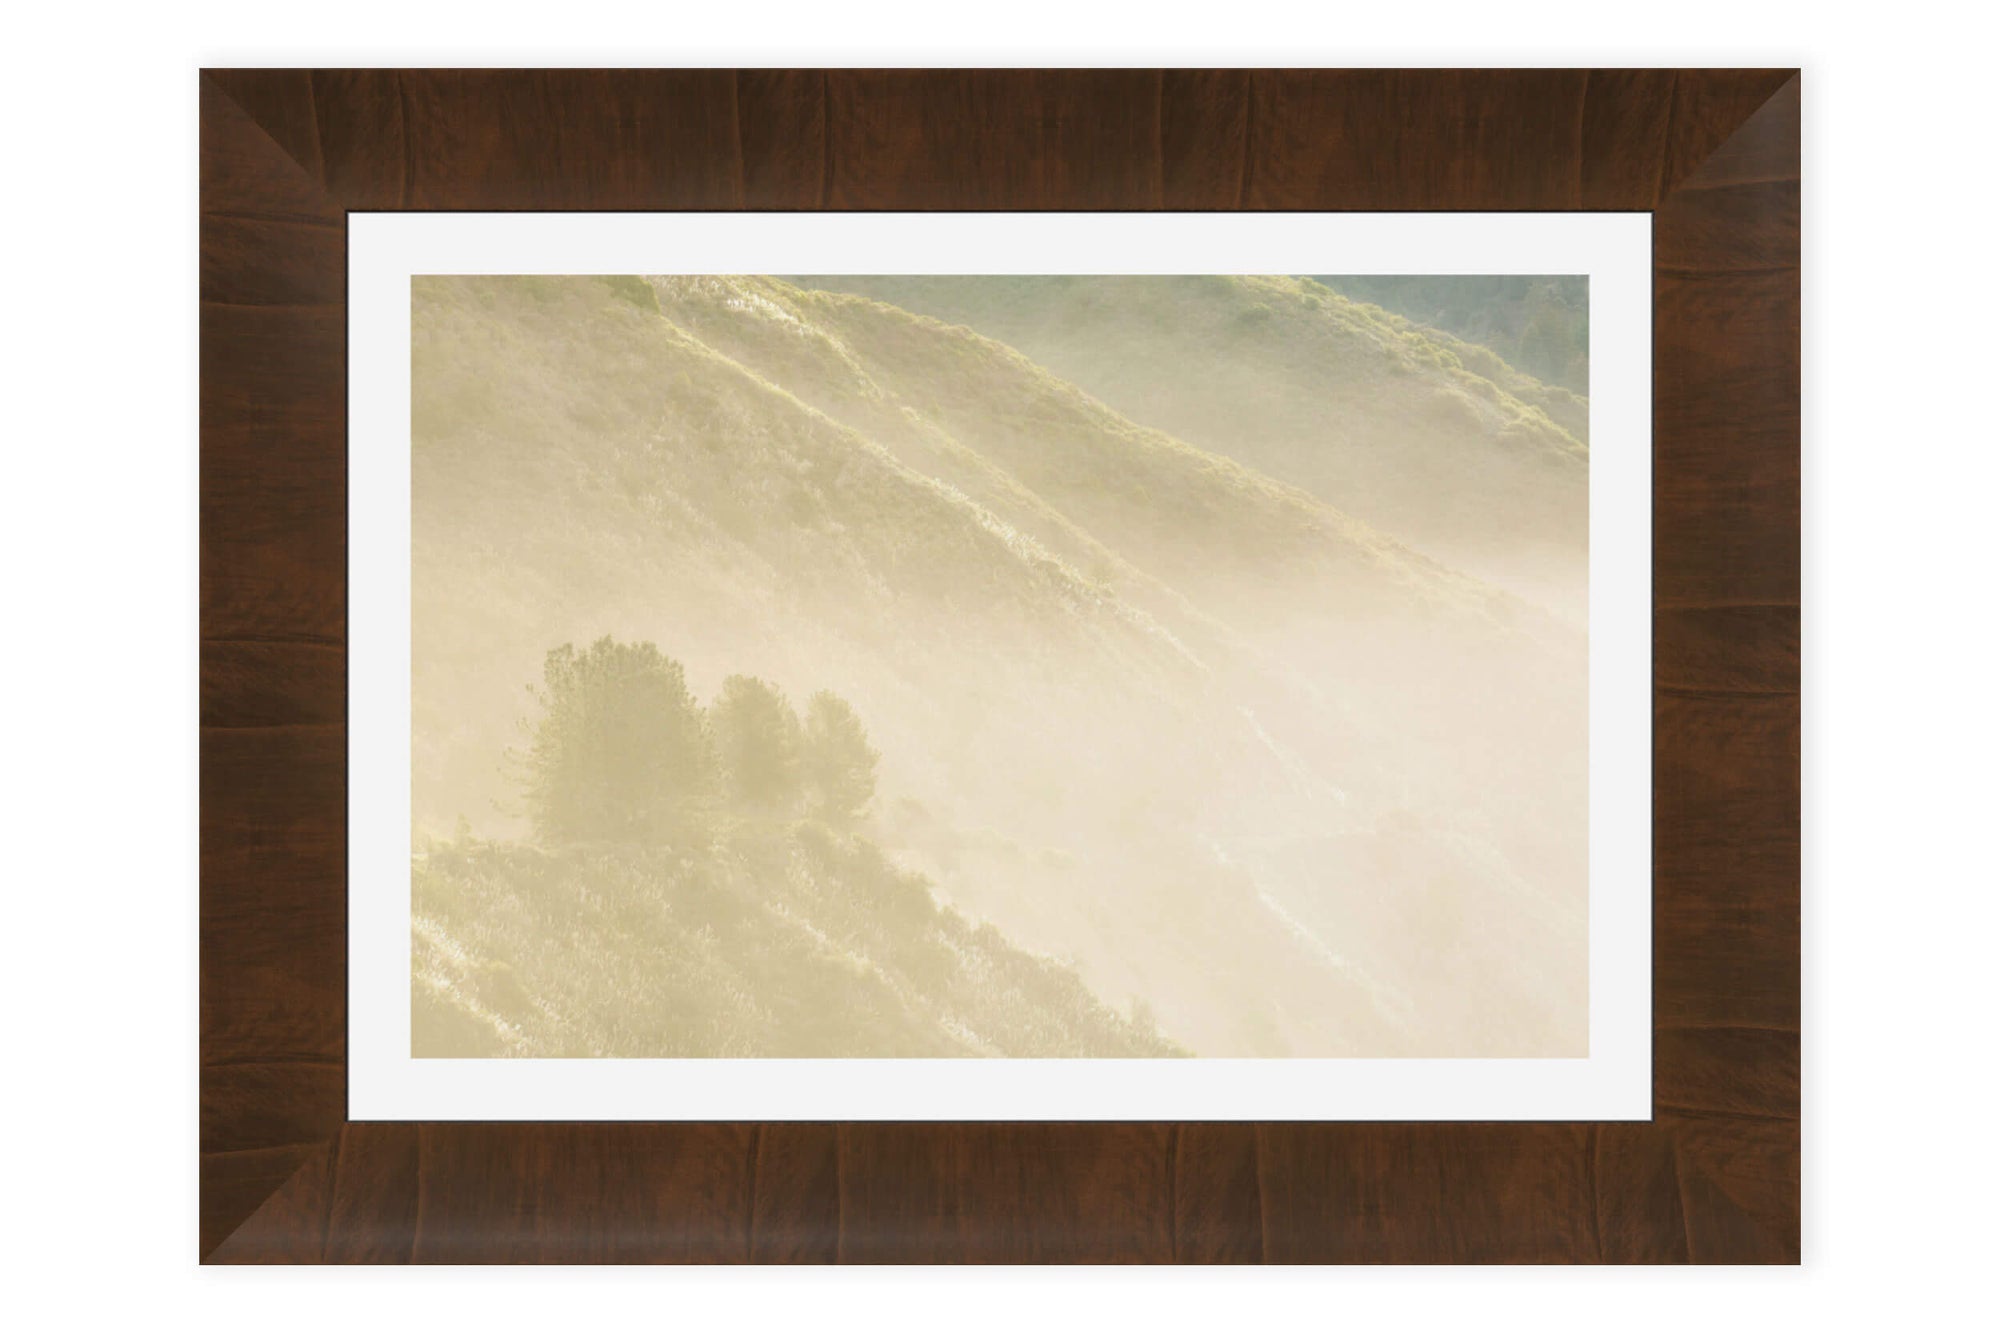 A framed Big Sur picture from the California coast.